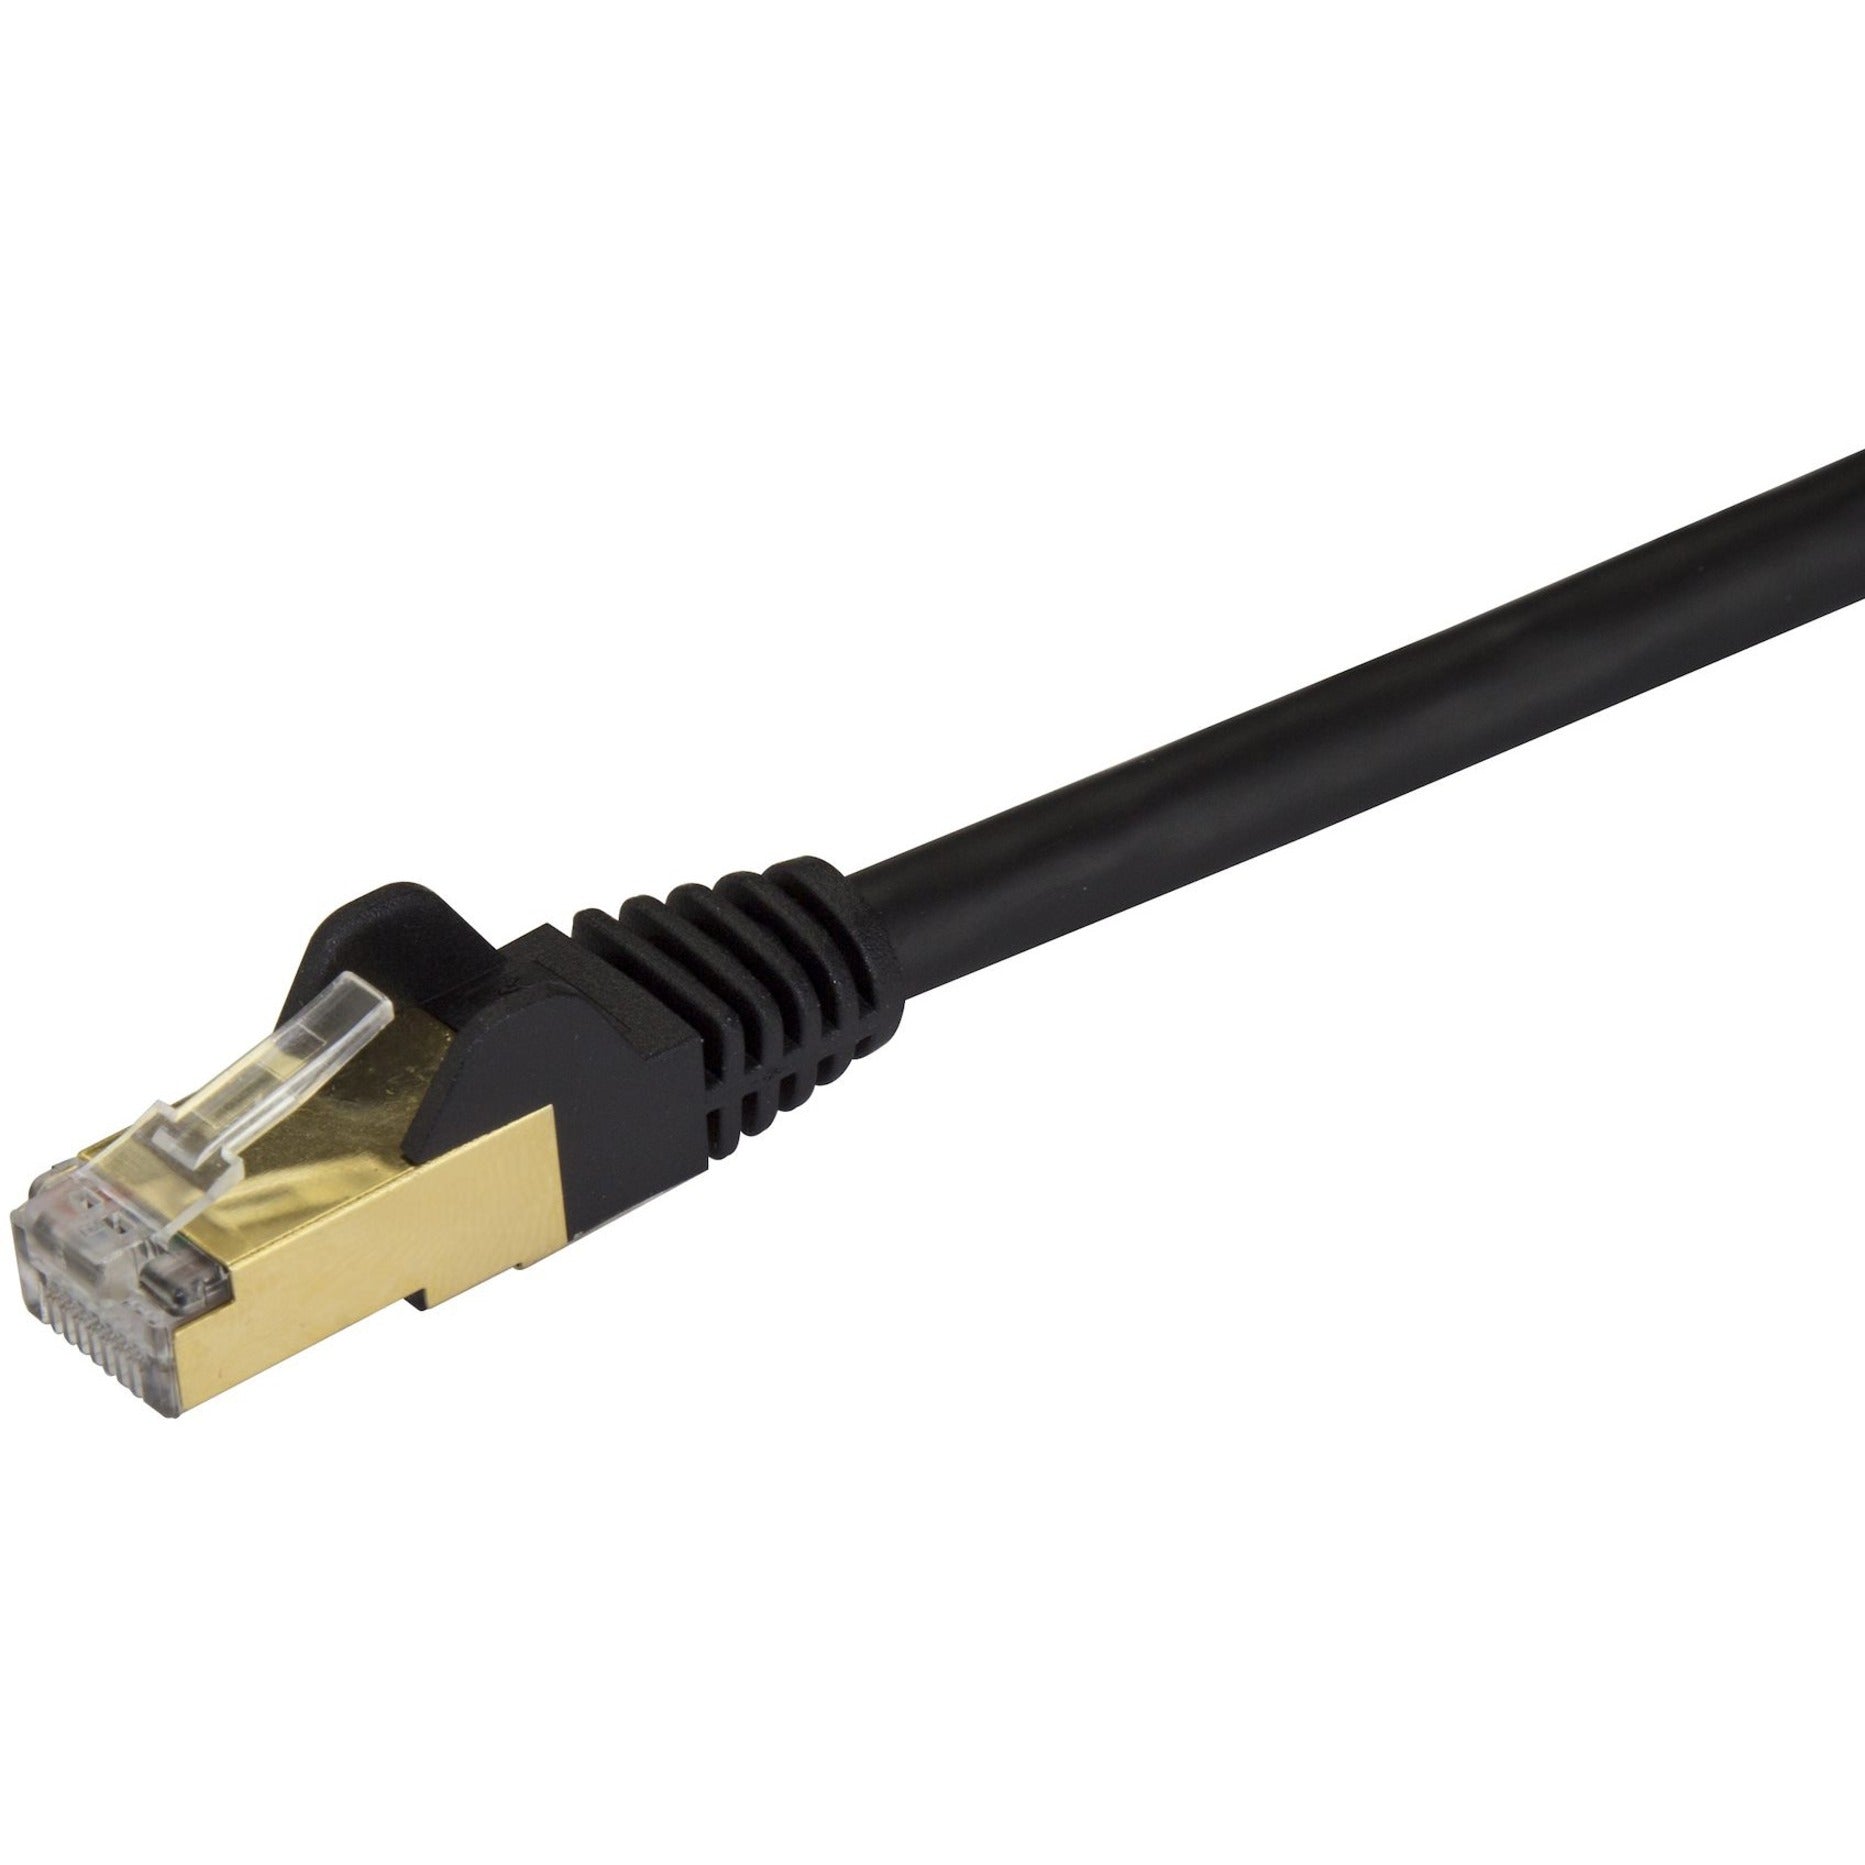 StarTech.com C6ASPAT25BK 25 ft Black Shielded Snagless 10Gb Cat 6a STP Patch Cable, 10Gbps Ethernet Cable